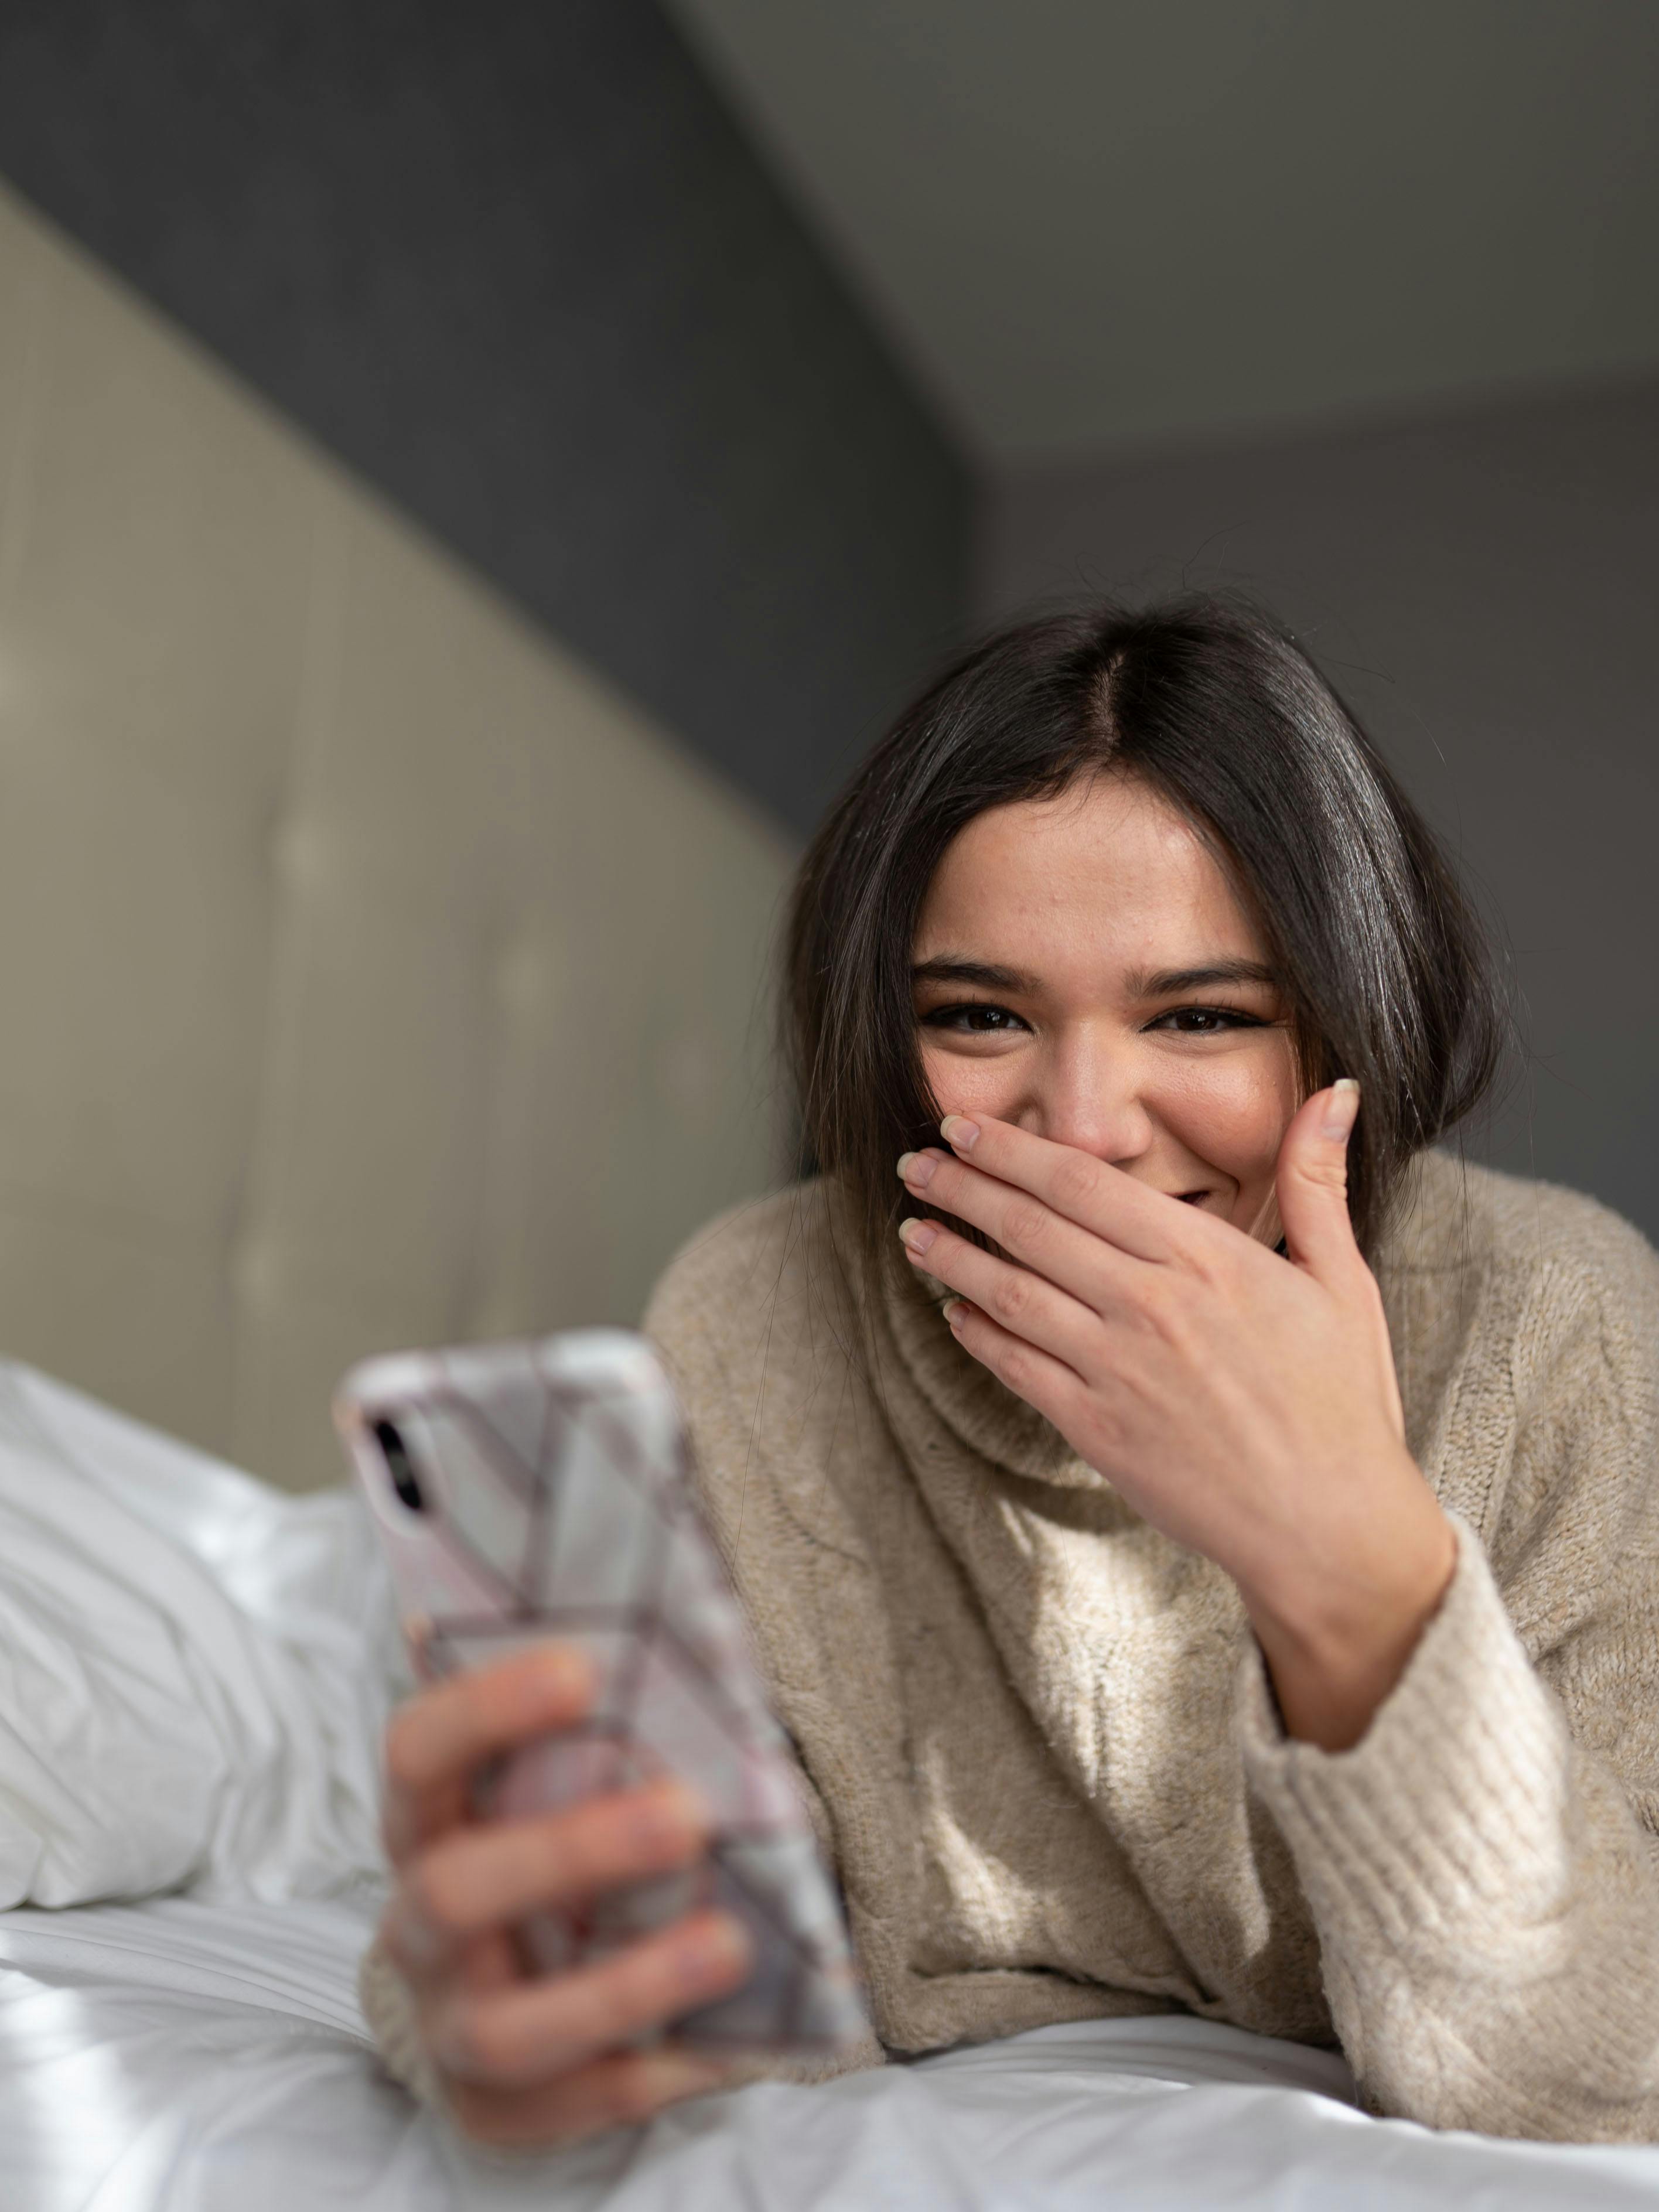 joyful young woman smiling while browsing smartphone on bed